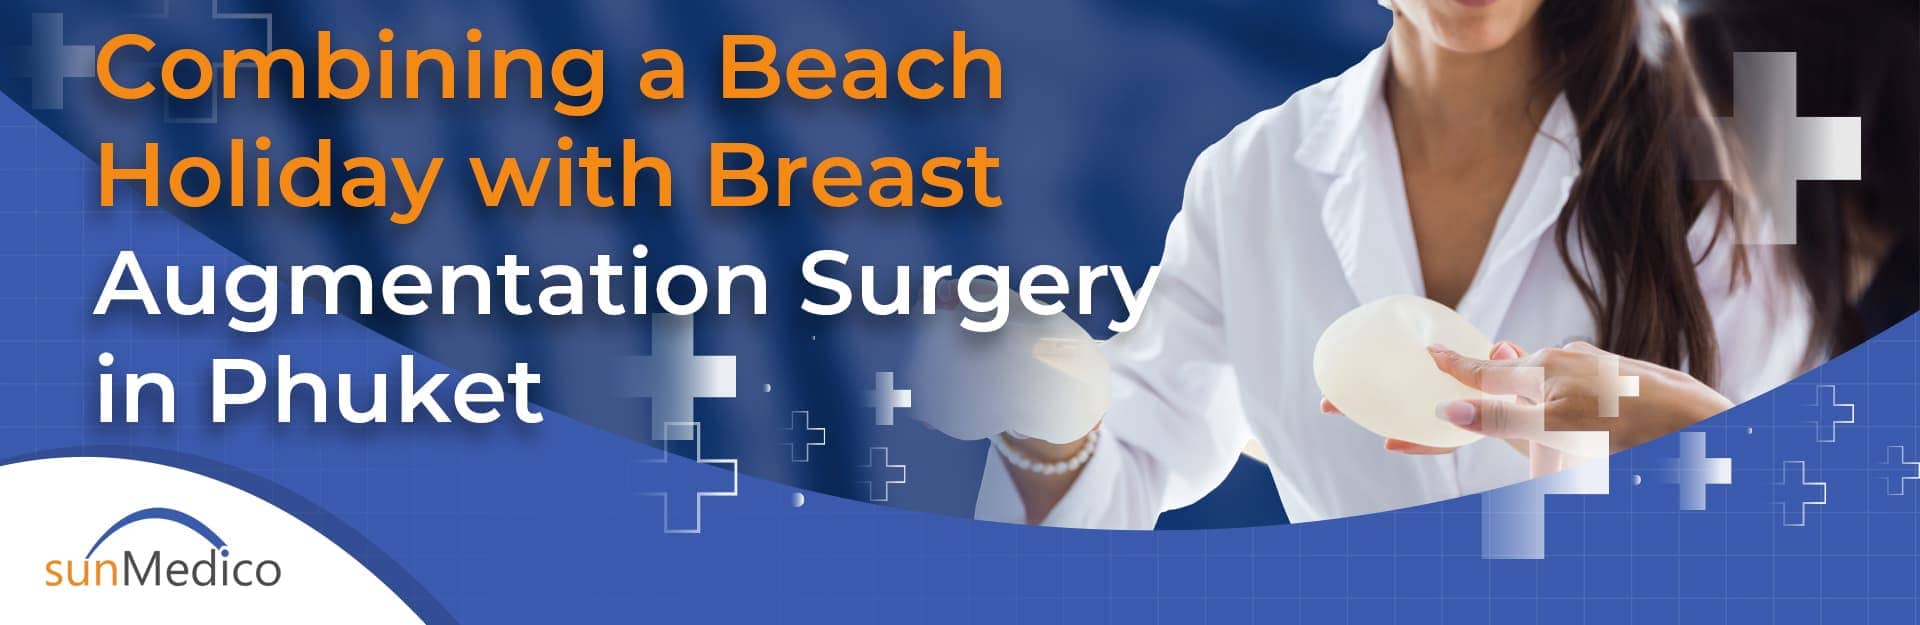 Combining a Beach Holiday with Breast Augmentation Surgery in Phuket